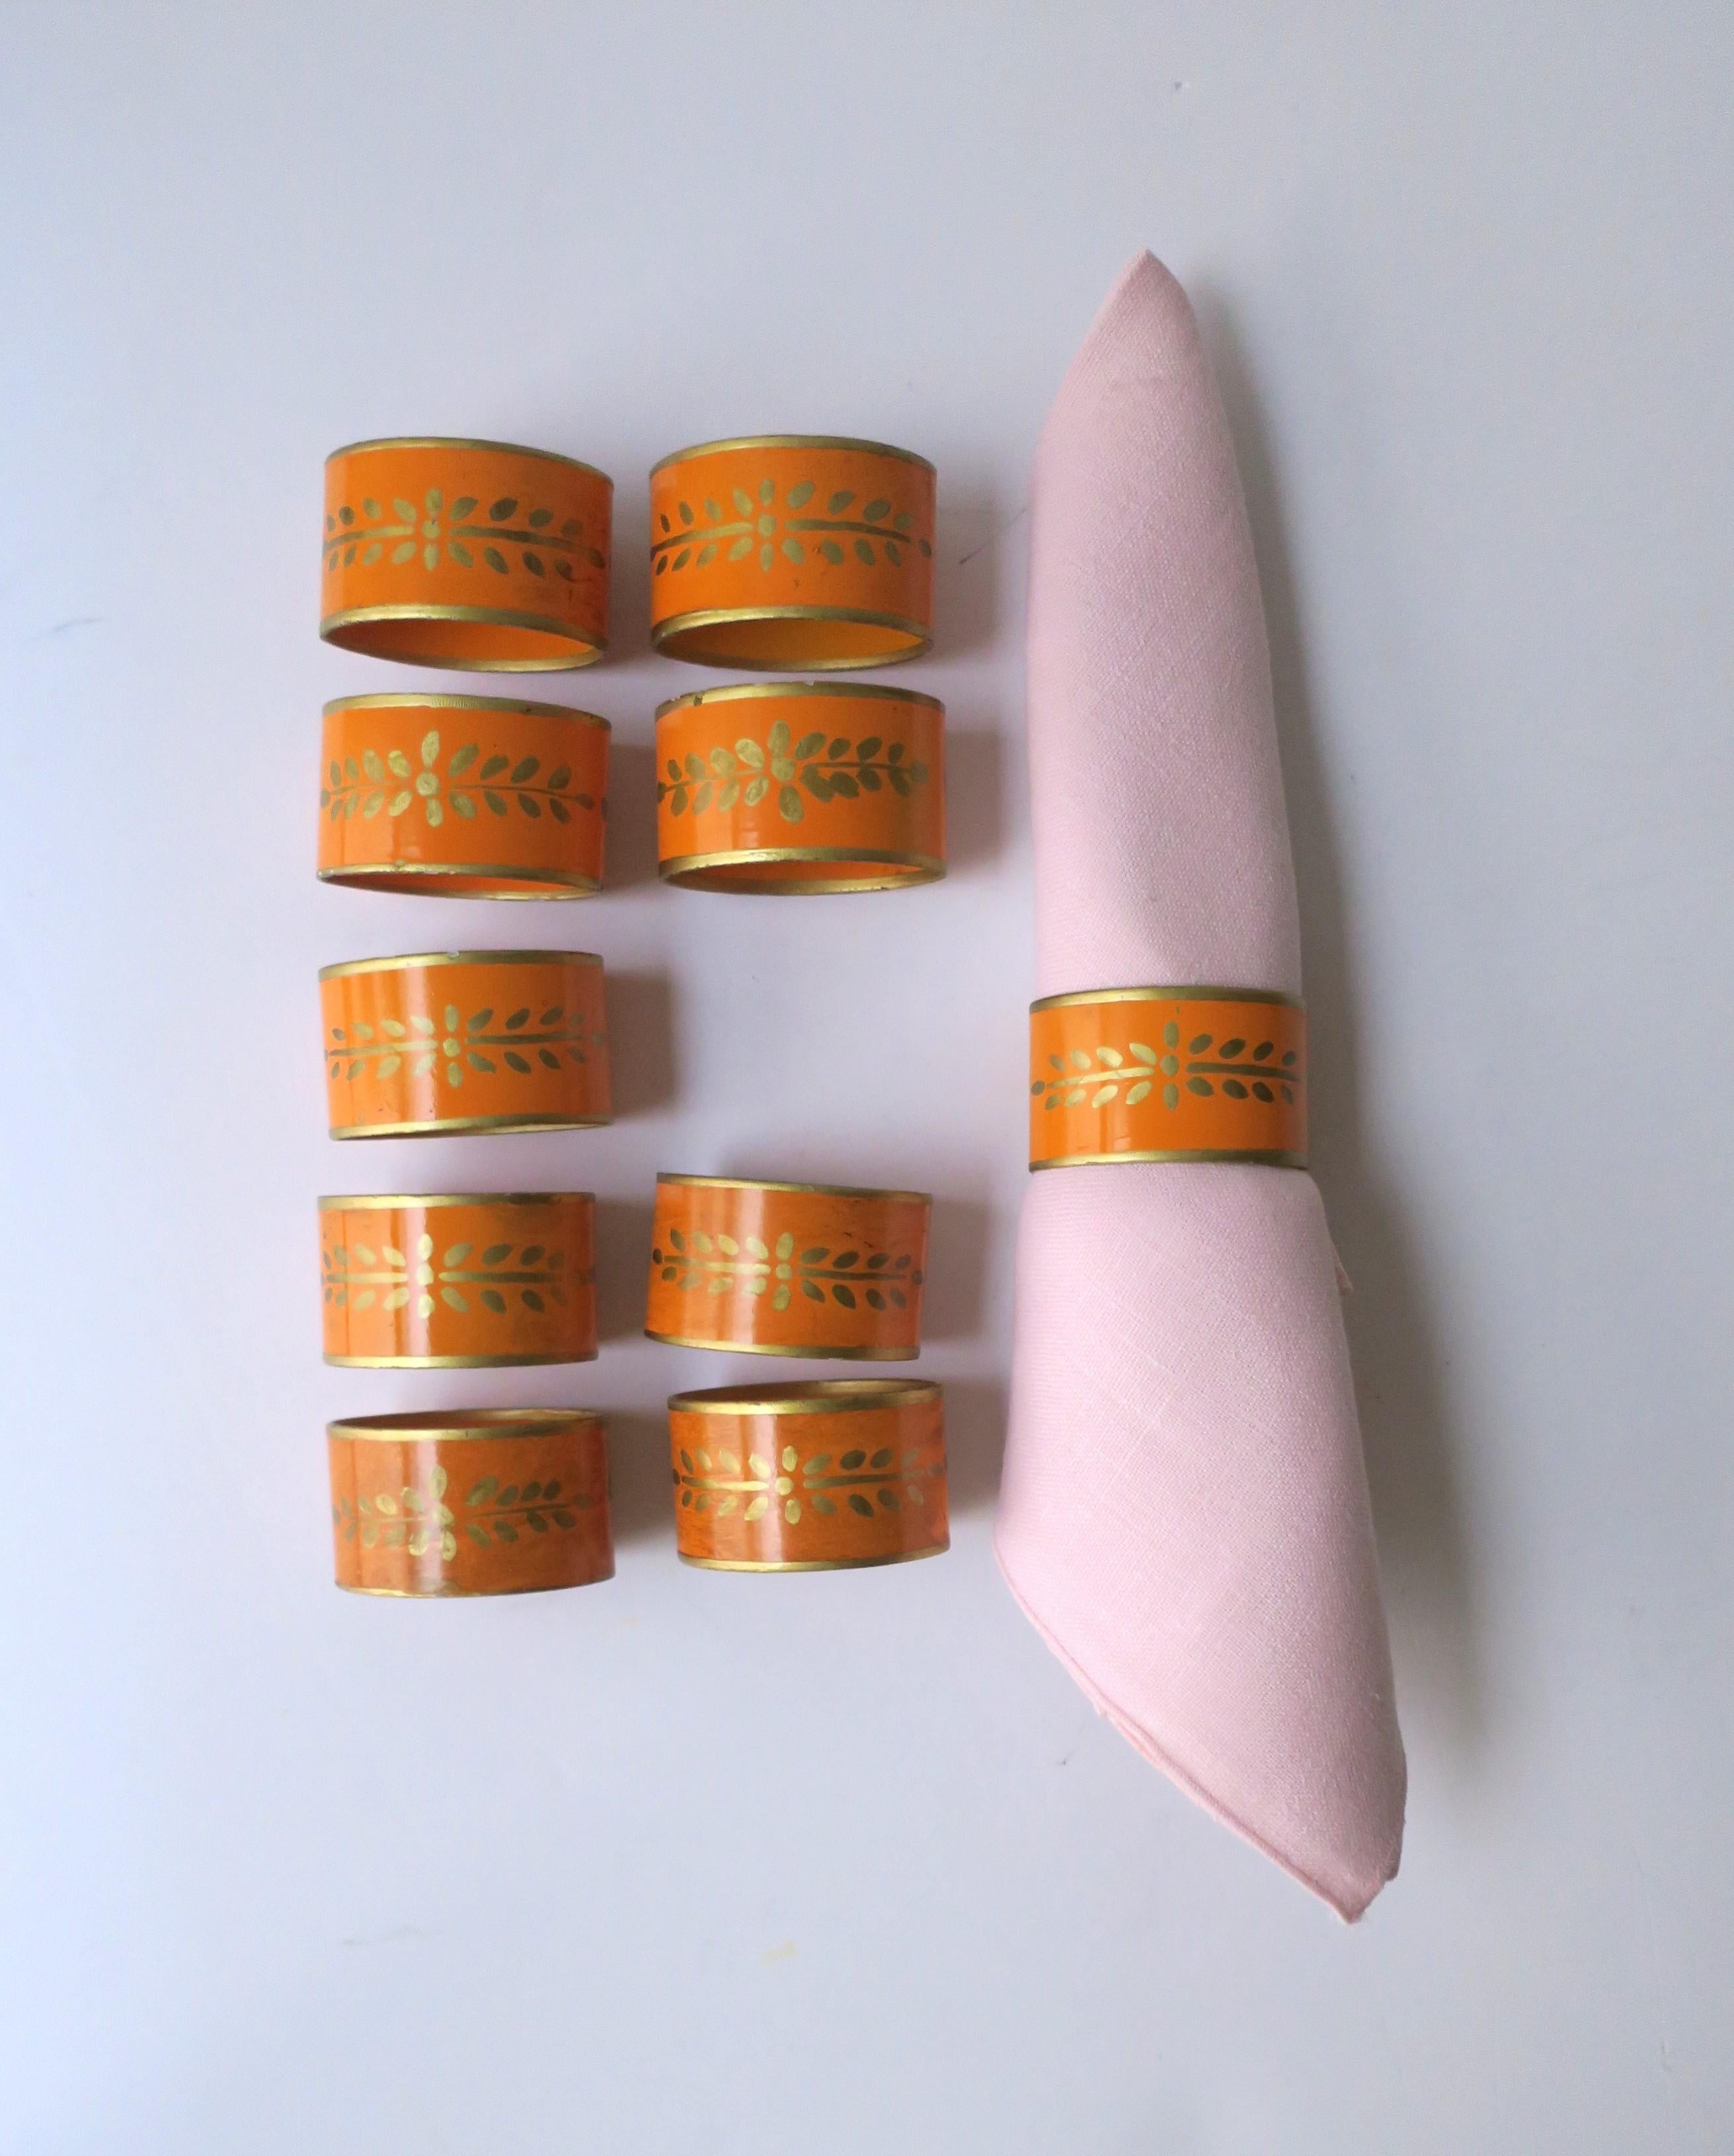 A great set of ten (10) Italian tole napkin ring holders in orange and gold, circa mid-20th century, Italy. Set is an orange enamel with gold hand-painted design. Marked 'Made in Italy' as shown in images. A great set for a dining table, creating